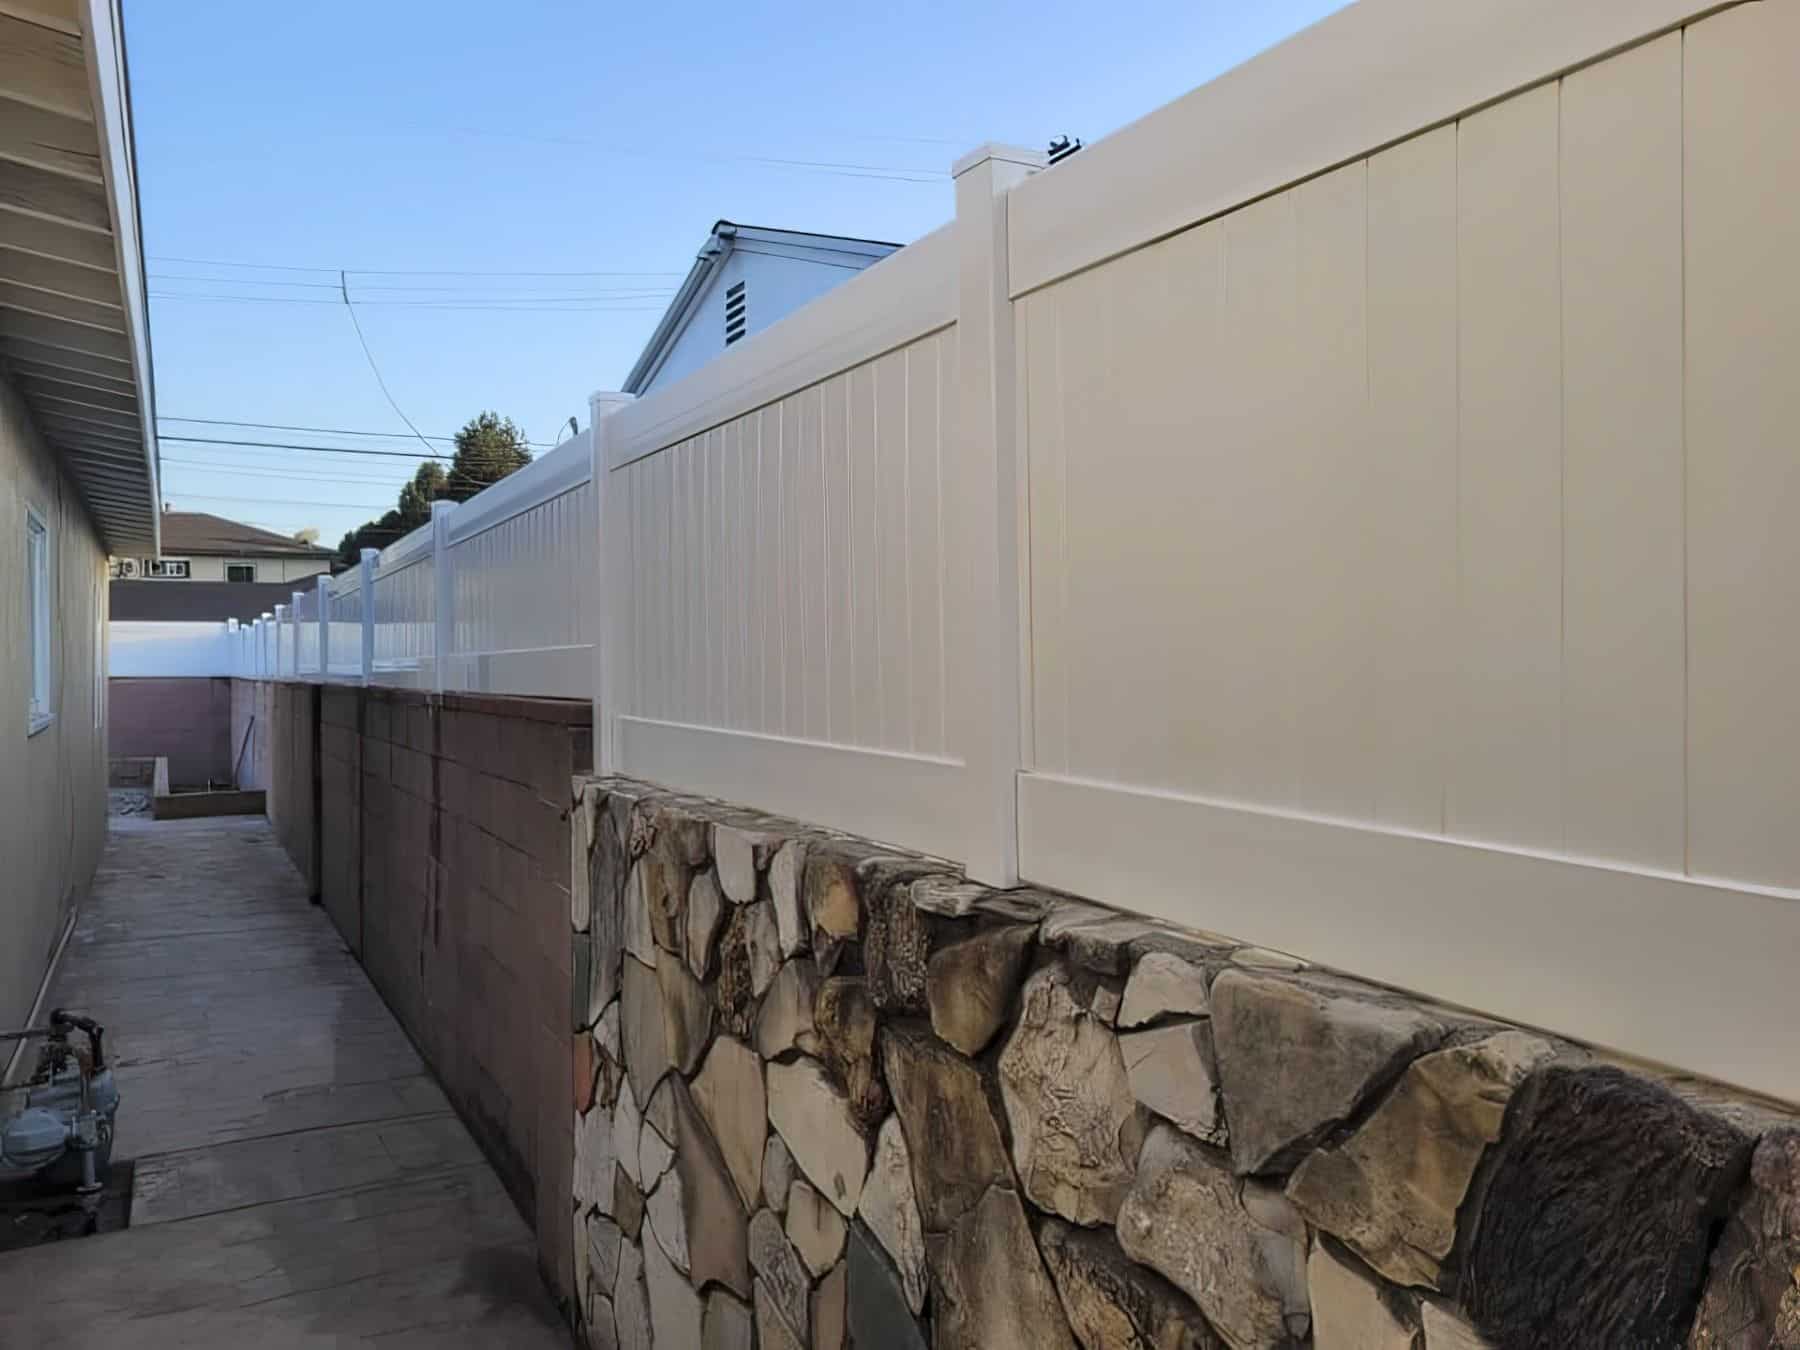 Vinyl privacy wall topper on concrete boundary wall and granite stone wall for side passage leading to backyard.